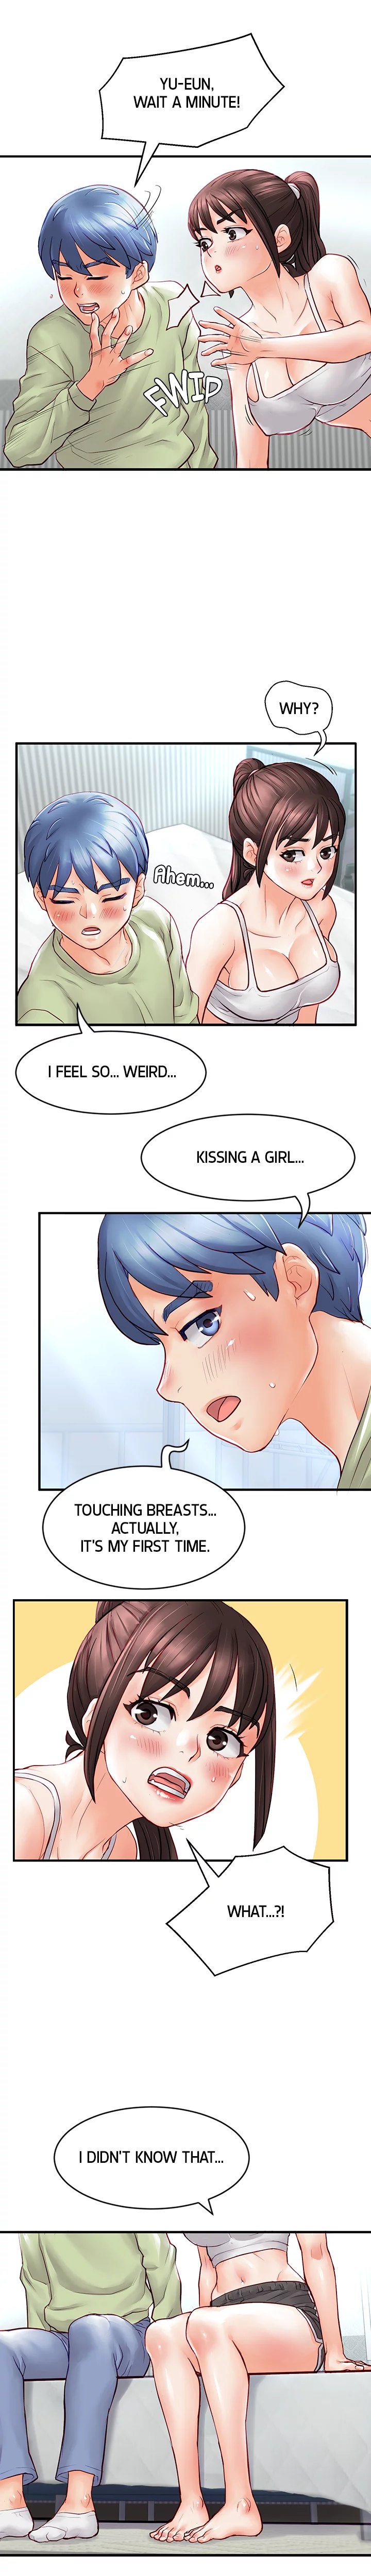 love-is-on-the-air-chap-3-17